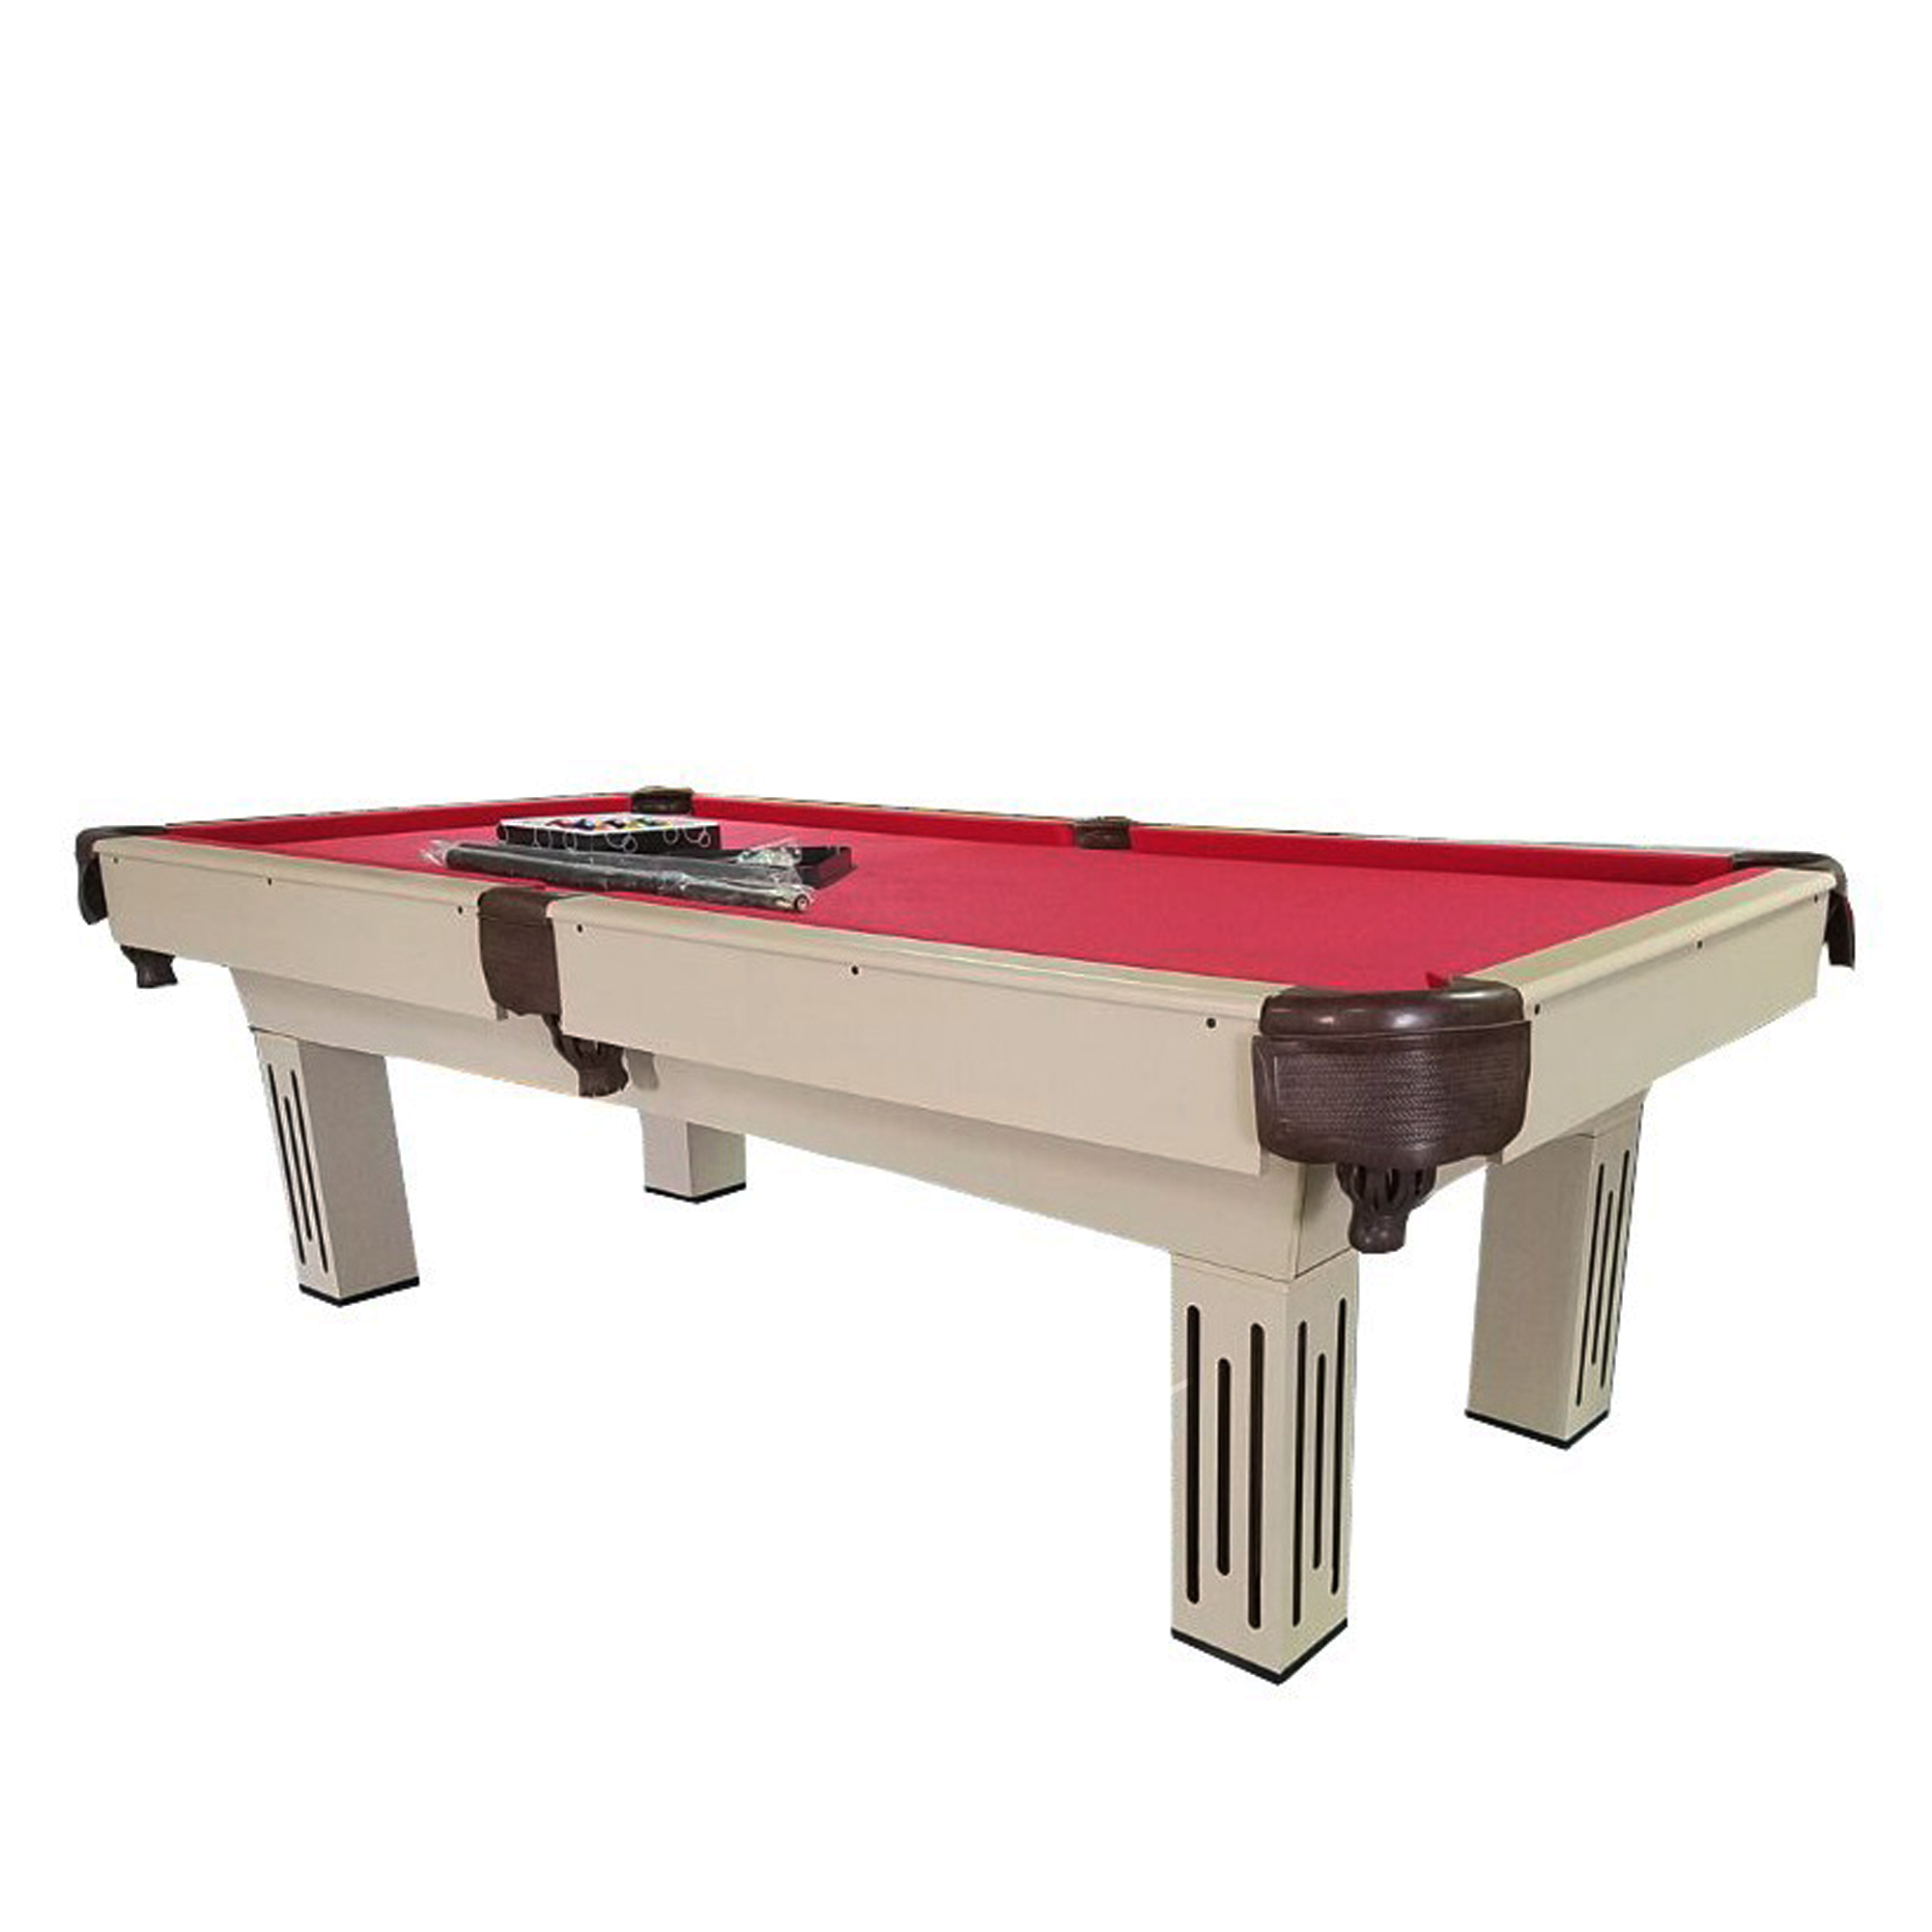 Pool Central 7' x 3.9' Red Billiard and Pool Net Pocket Game Table